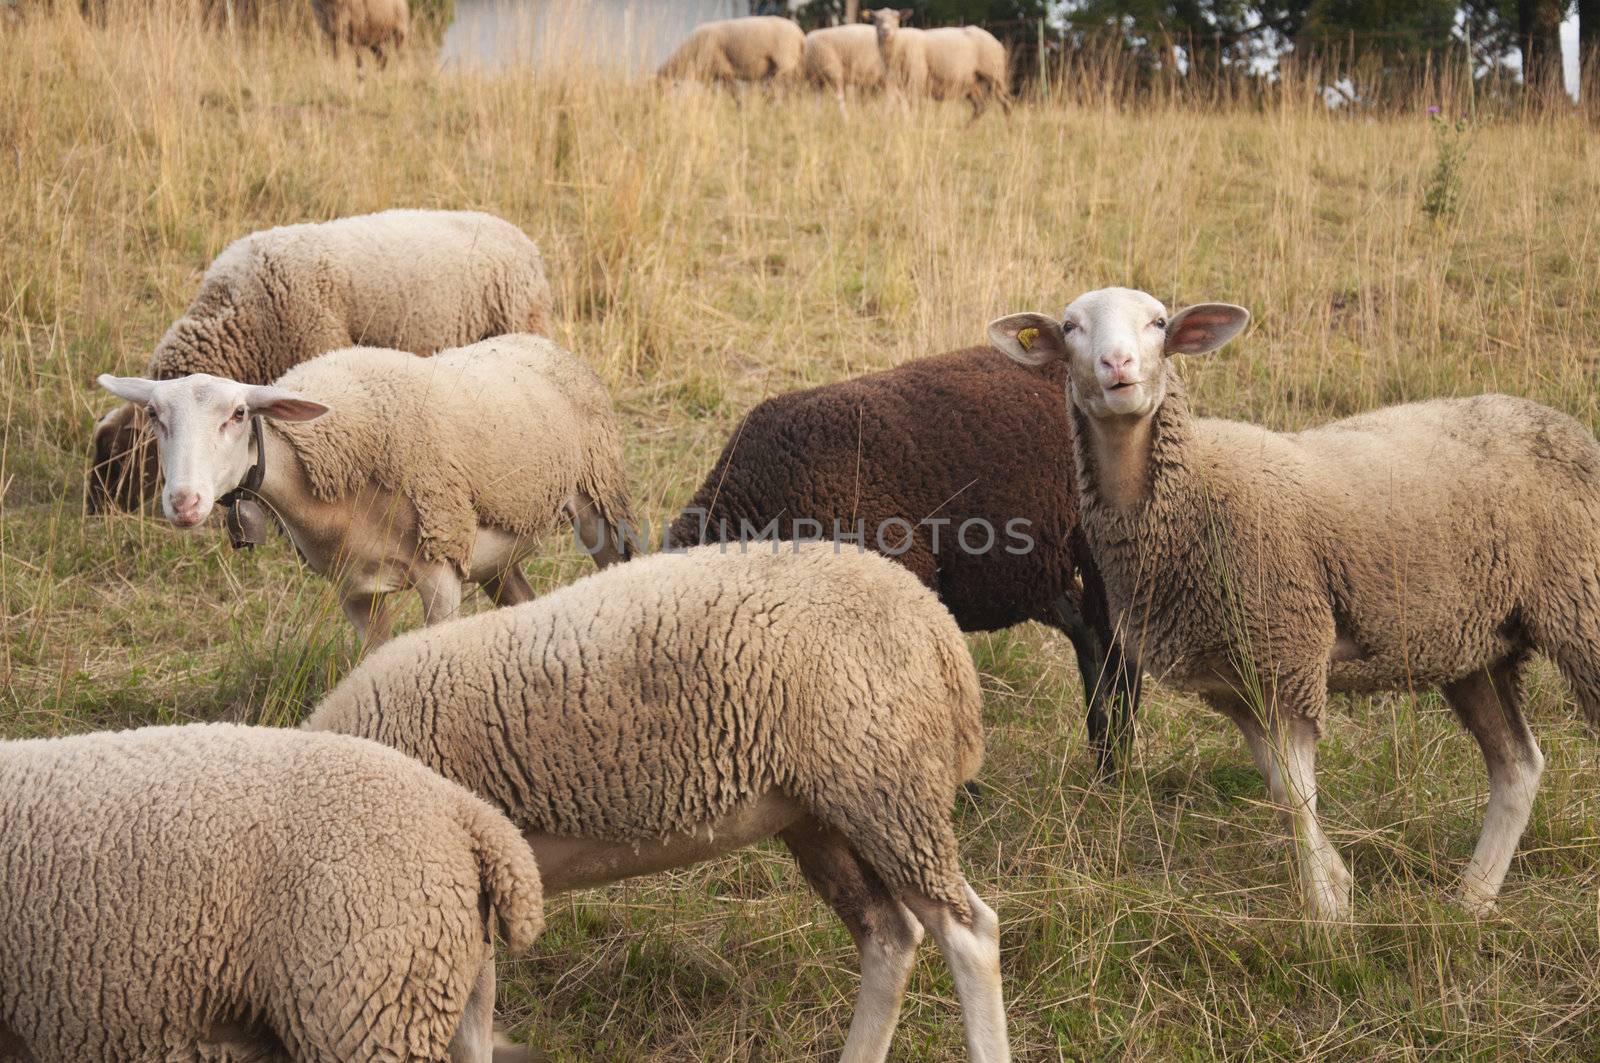 White Sheep and Brown Sheep with Ear Chips feeding in a field in Switzerland at Sunset